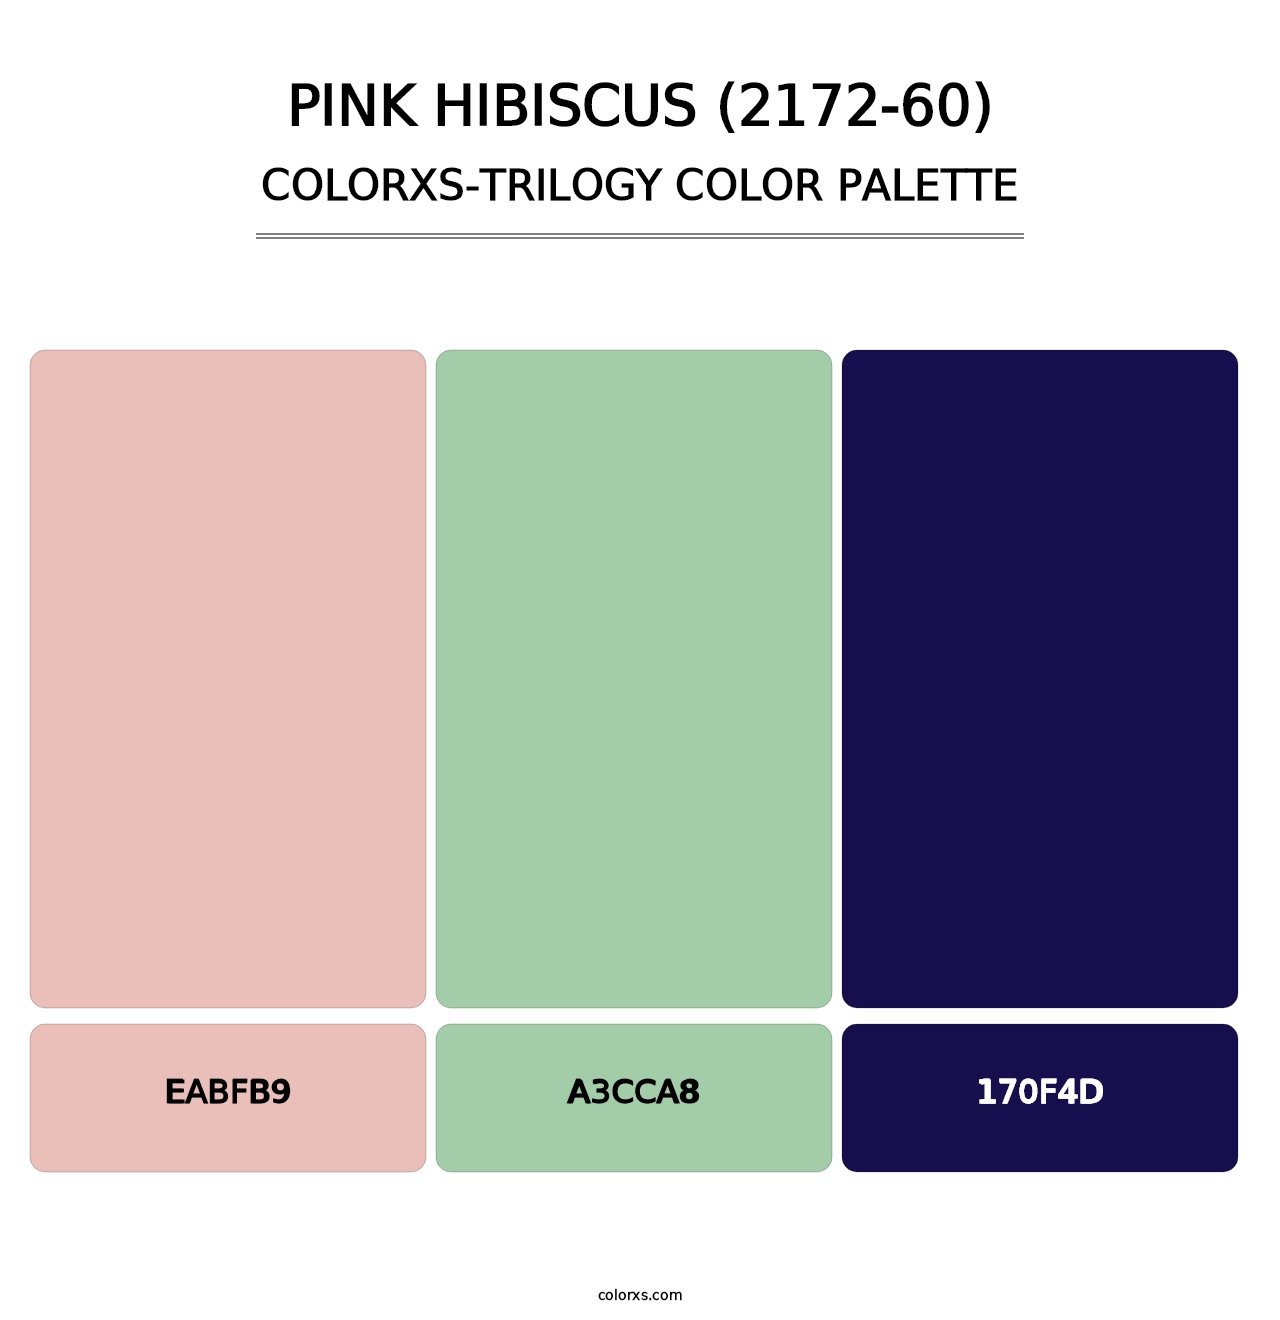 Pink Hibiscus (2172-60) - Colorxs Trilogy Palette